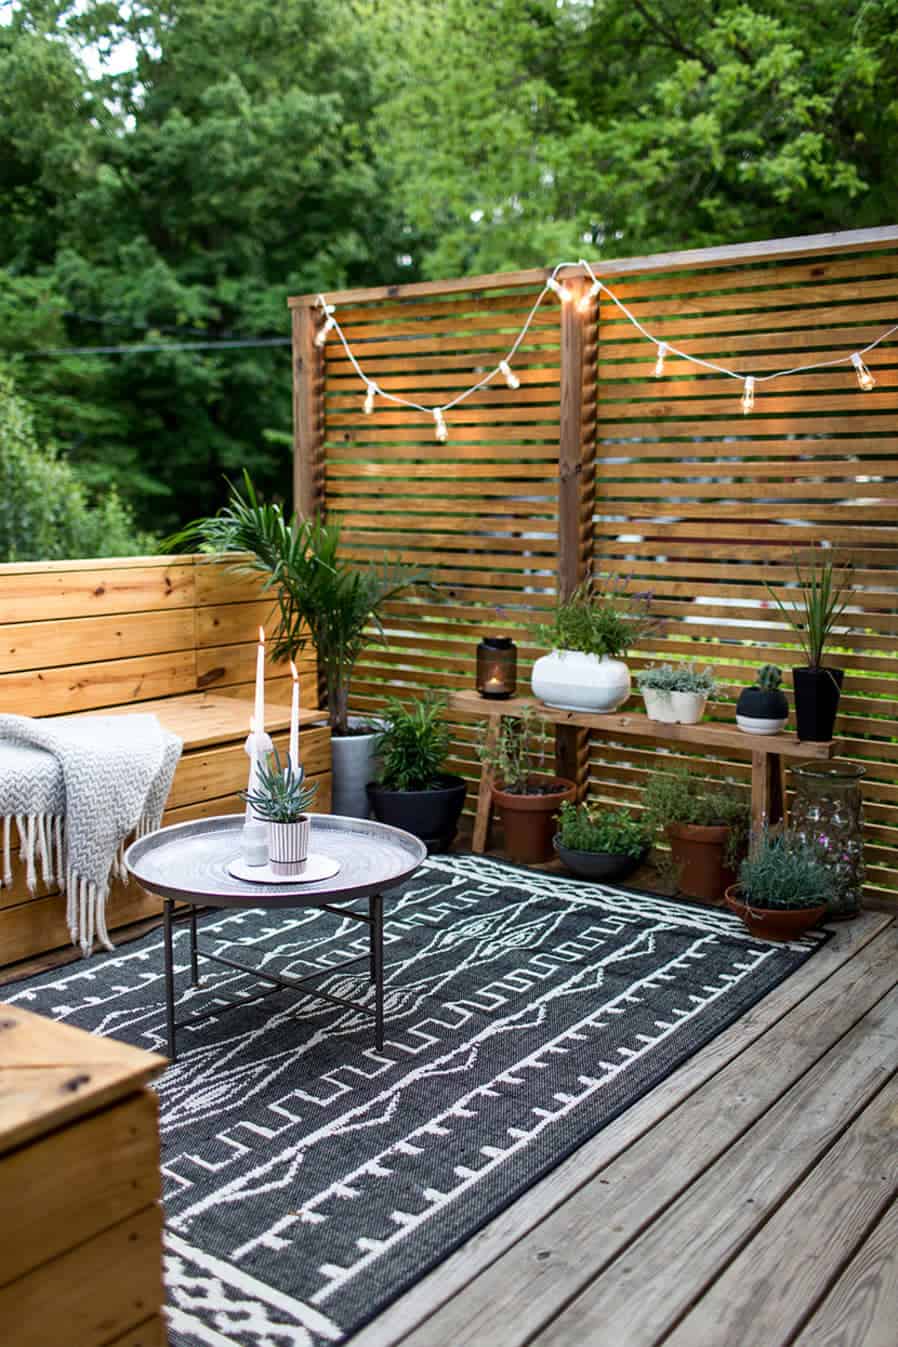 One of the great things about making your patio look interesting is that you can always come up with simple, yet efficient ideas to make this space your own. Itâ€™s interesting, it can offer a vast range of different options and you can customize it the way you always wanted.